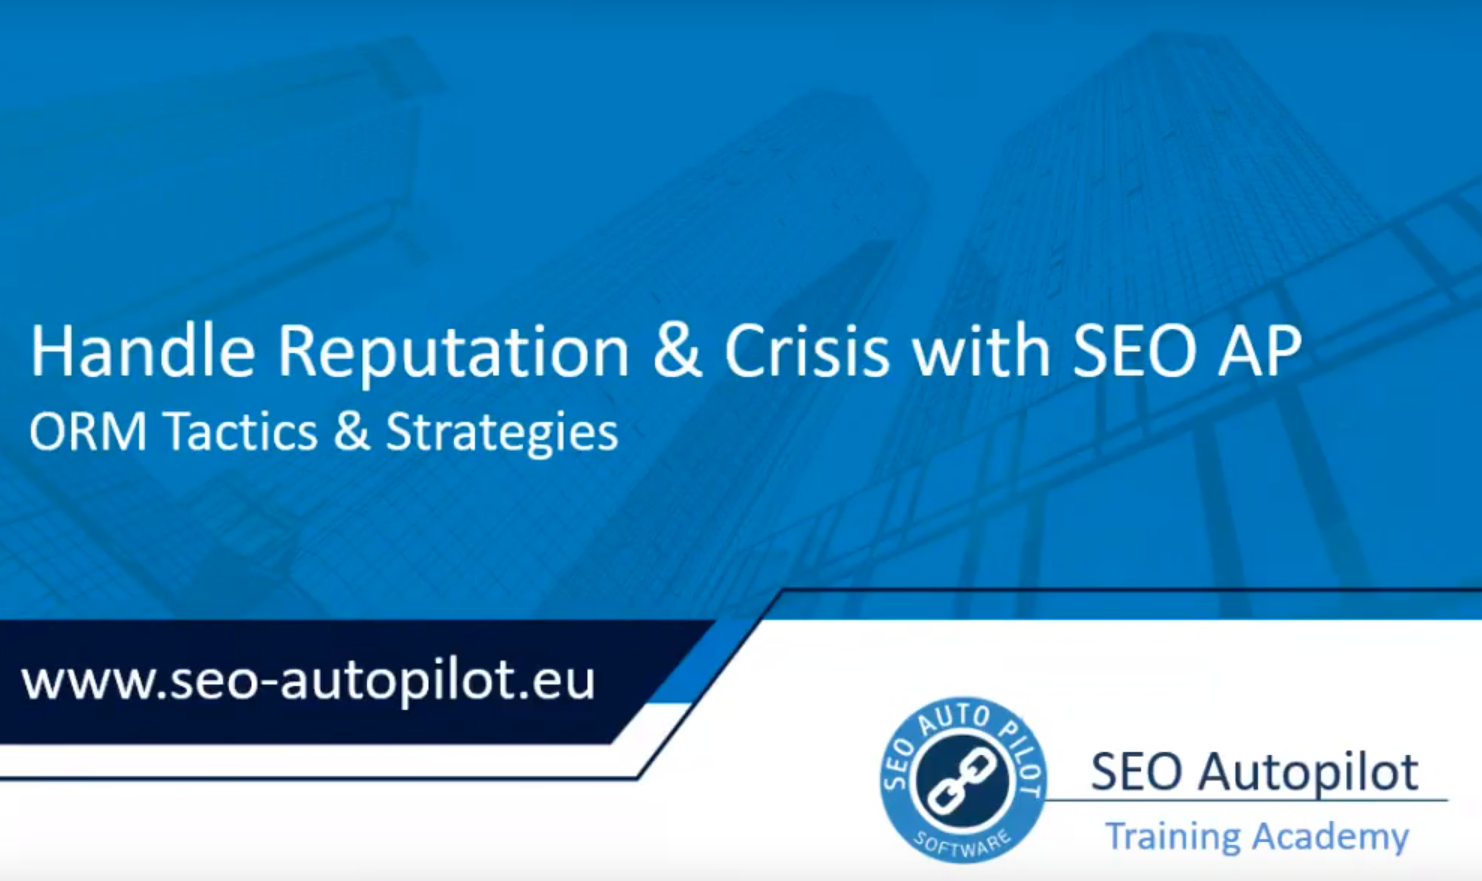 SEO Autopilot Software - Welcome to our New Blog!